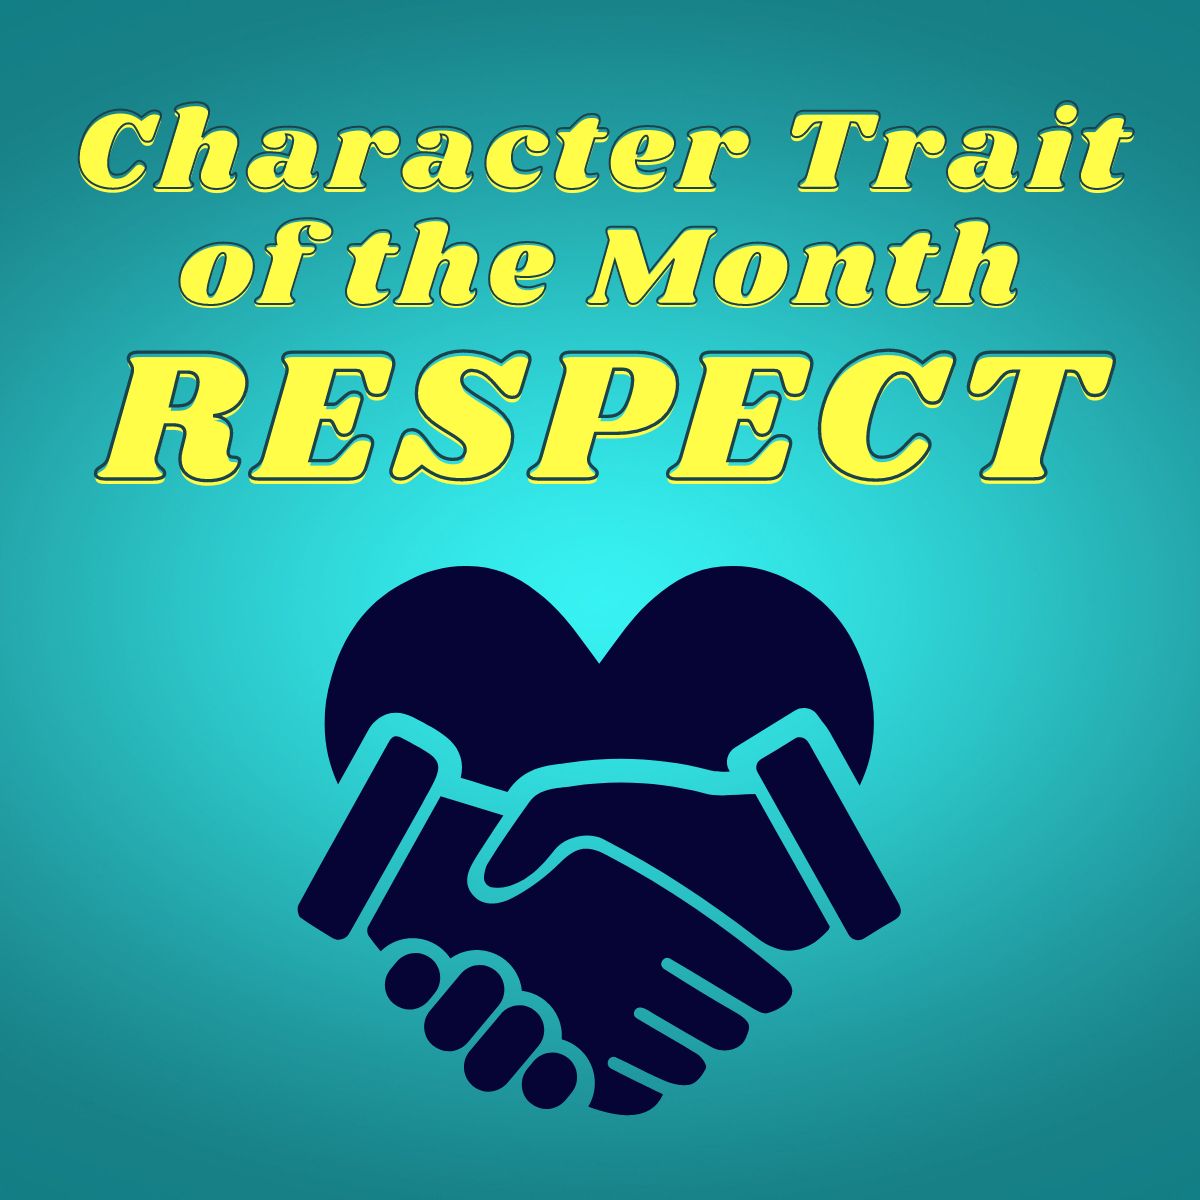 Character Trait of the Month: Respect